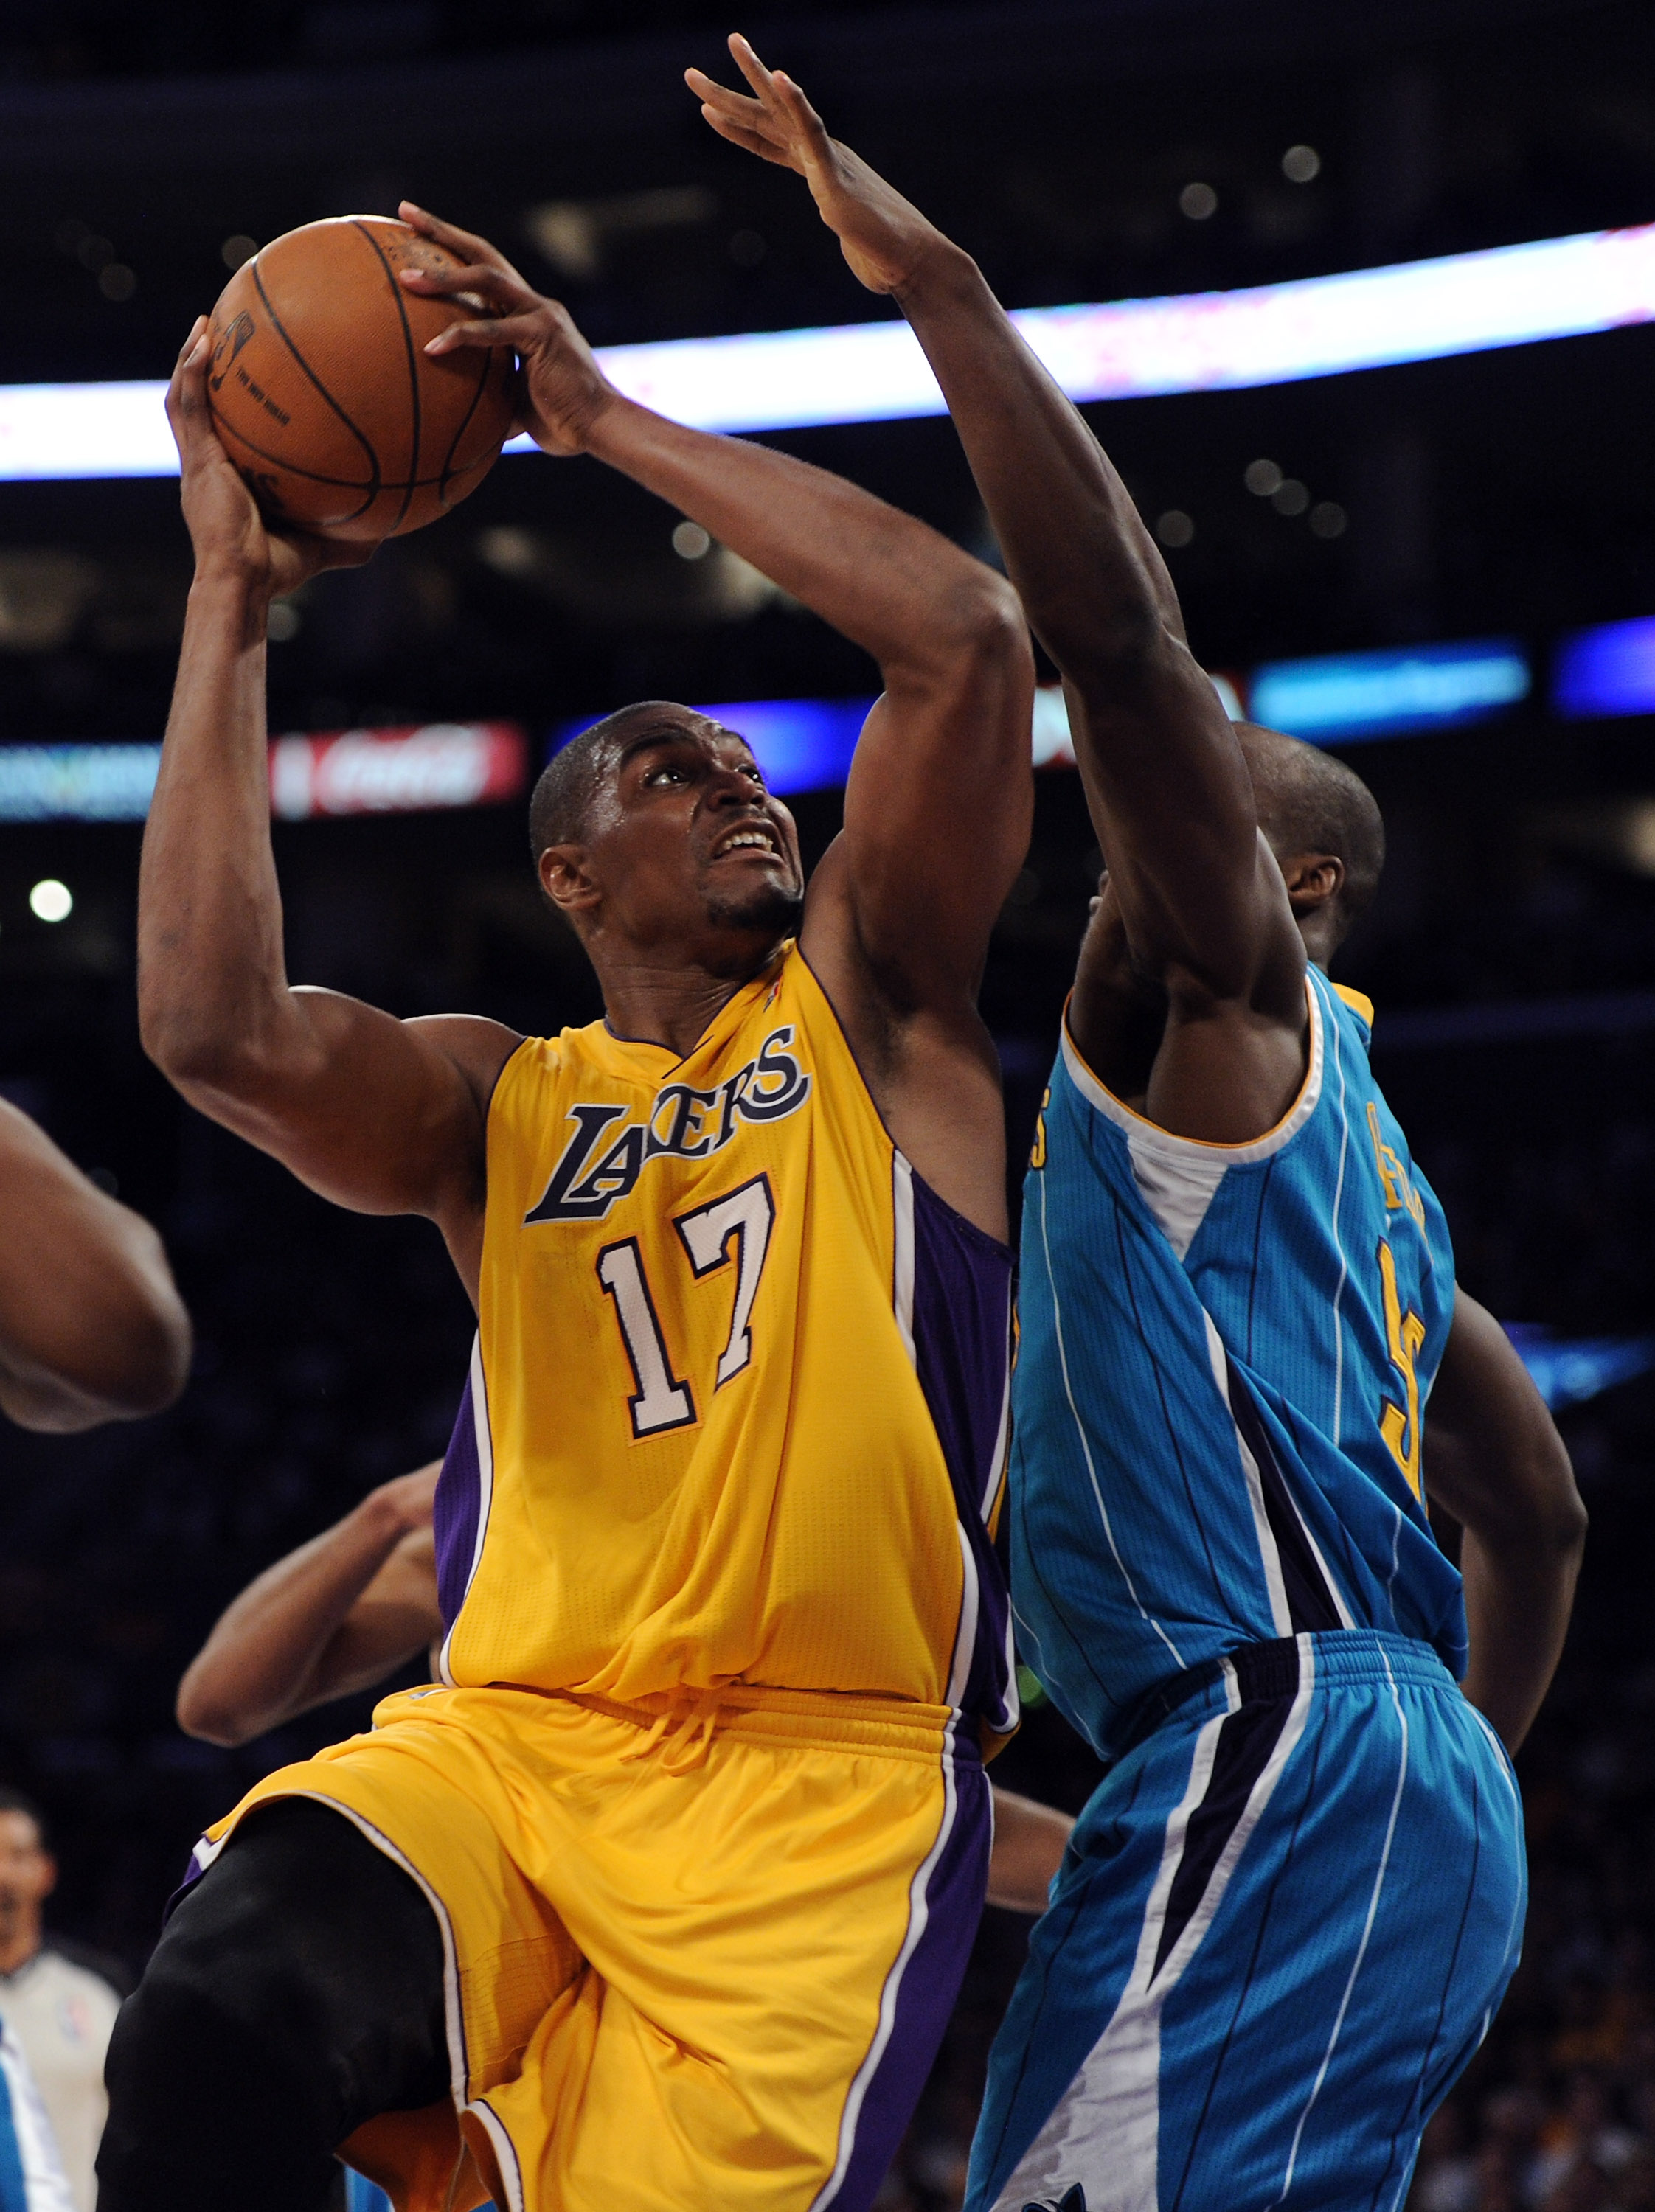 LOS ANGELES, CA - APRIL 20:  Andrew Bynum #17 of the Los Angeles Lakers goes up for a shot against Emeka Okafor #50 of the New Orleans Hornets in Game Two of the Western Conference Quarterfinals in the 2011 NBA Playoffs on April 20, 2011 at Staples Center